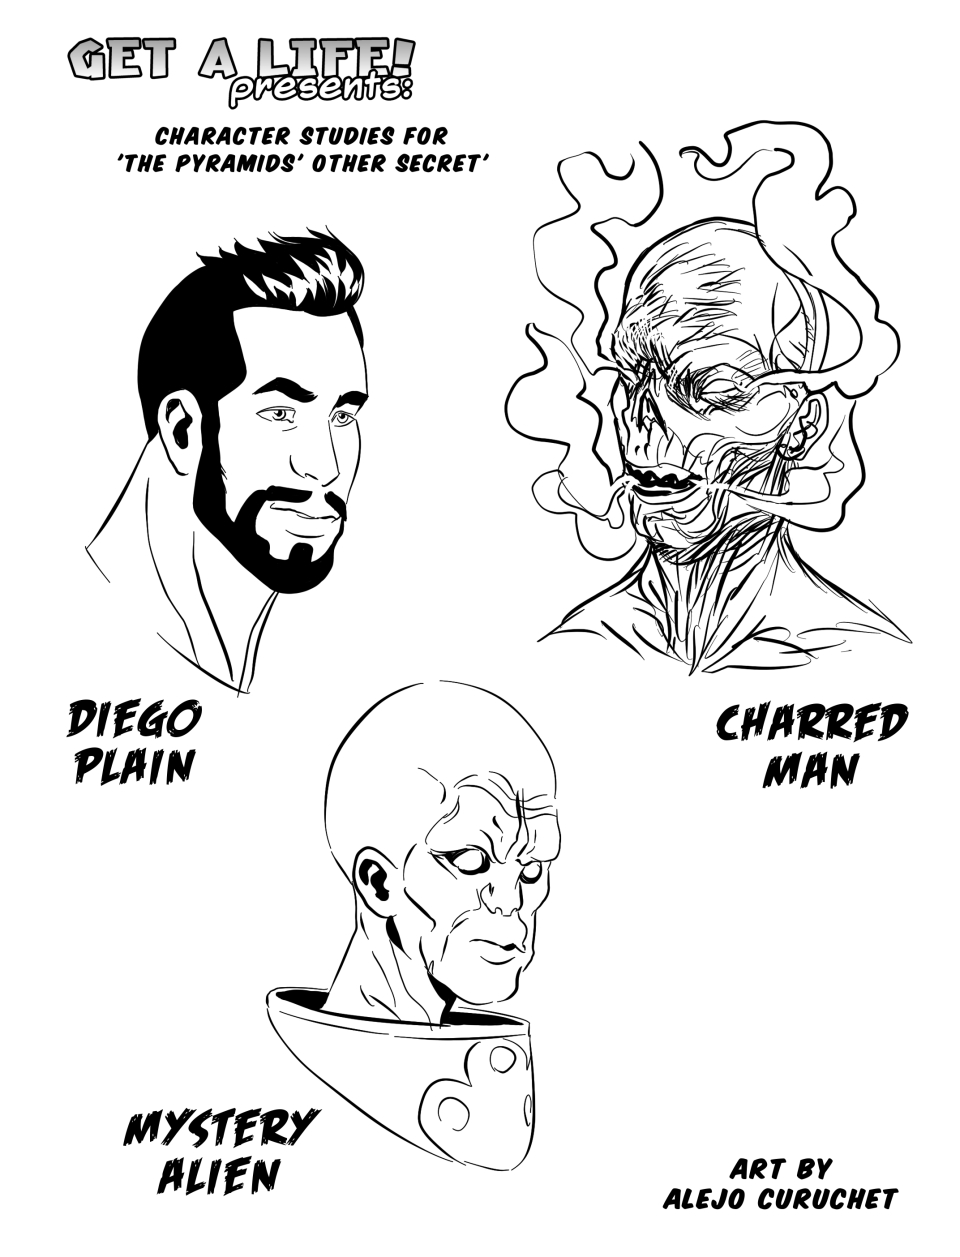 Character studies for: The Pyramids' Other Secret